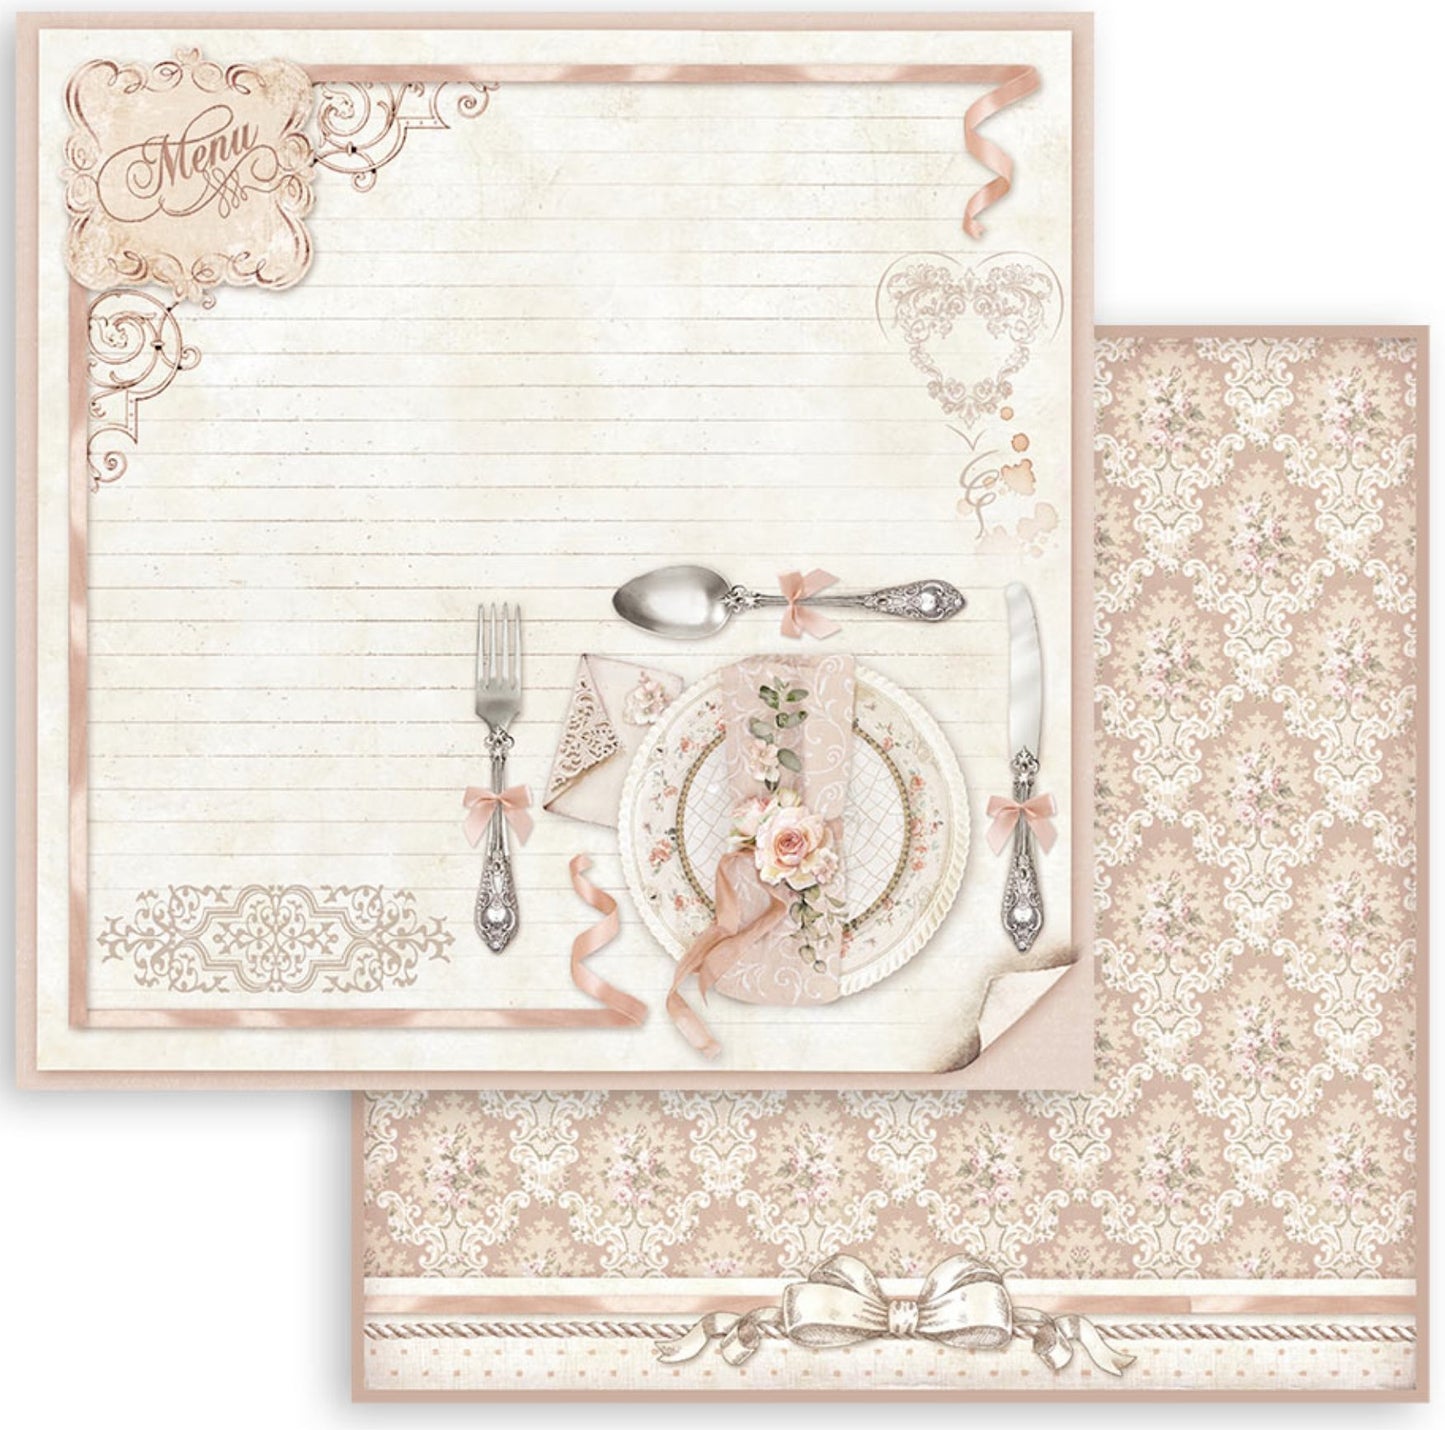 Stamperia - Scrapbooking Small Pad 10 sheets cm 20,3X20,3 (8"X8") - You and Me Stamperia